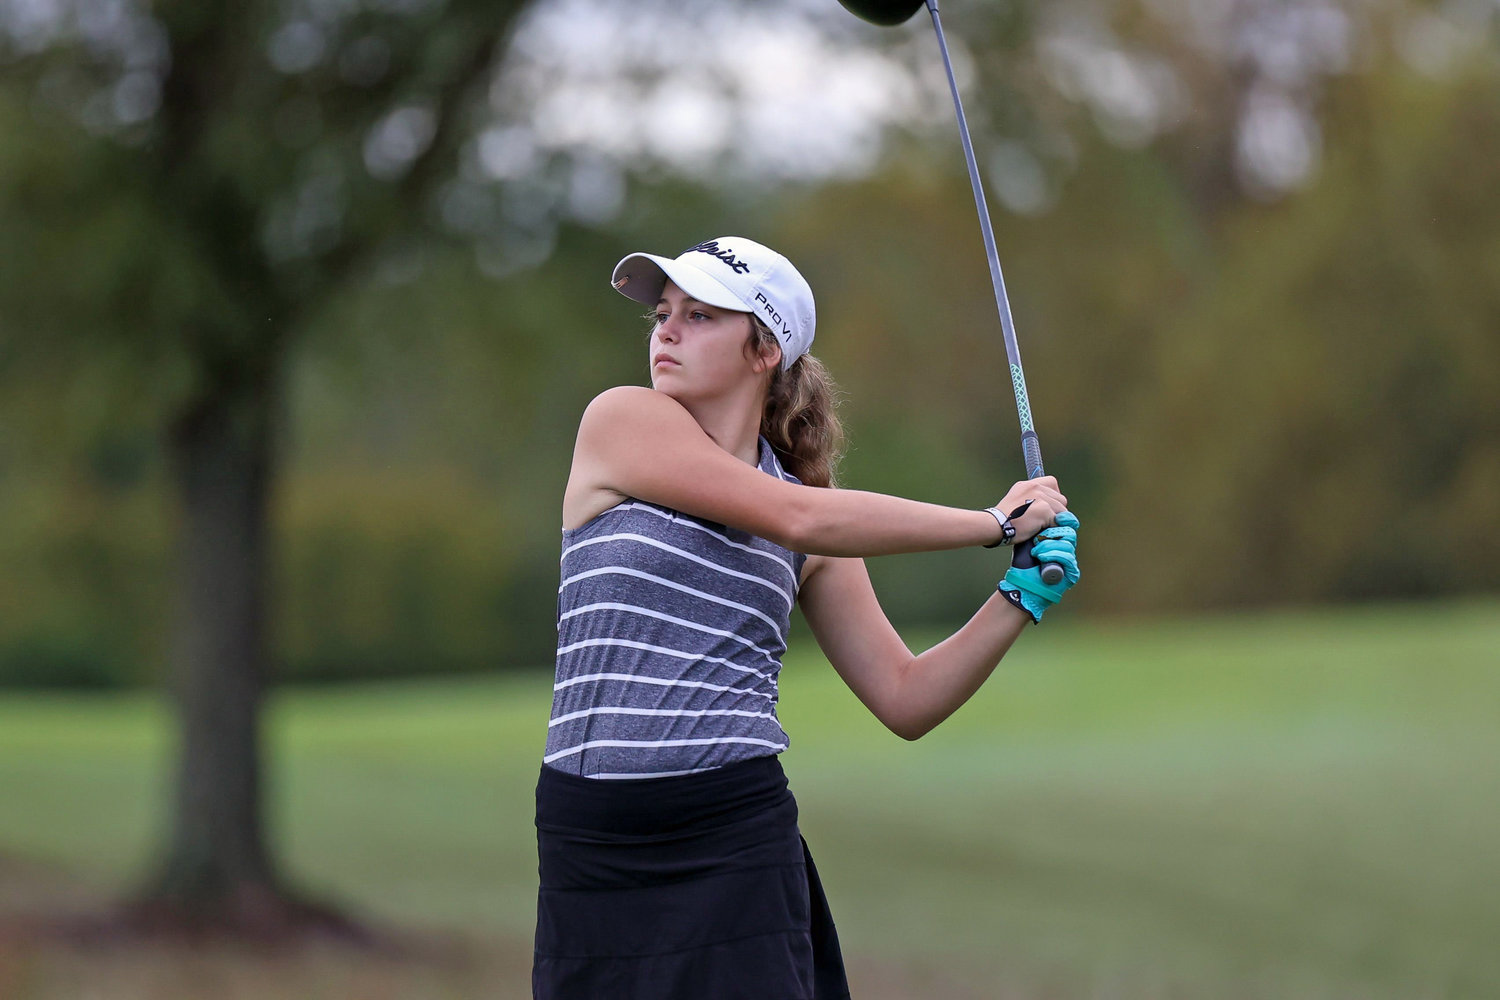 Cornersville sophomore Annabelle Mulliniks finished in 9th place in the Class A State Golf Tournament last week at Sevierville.